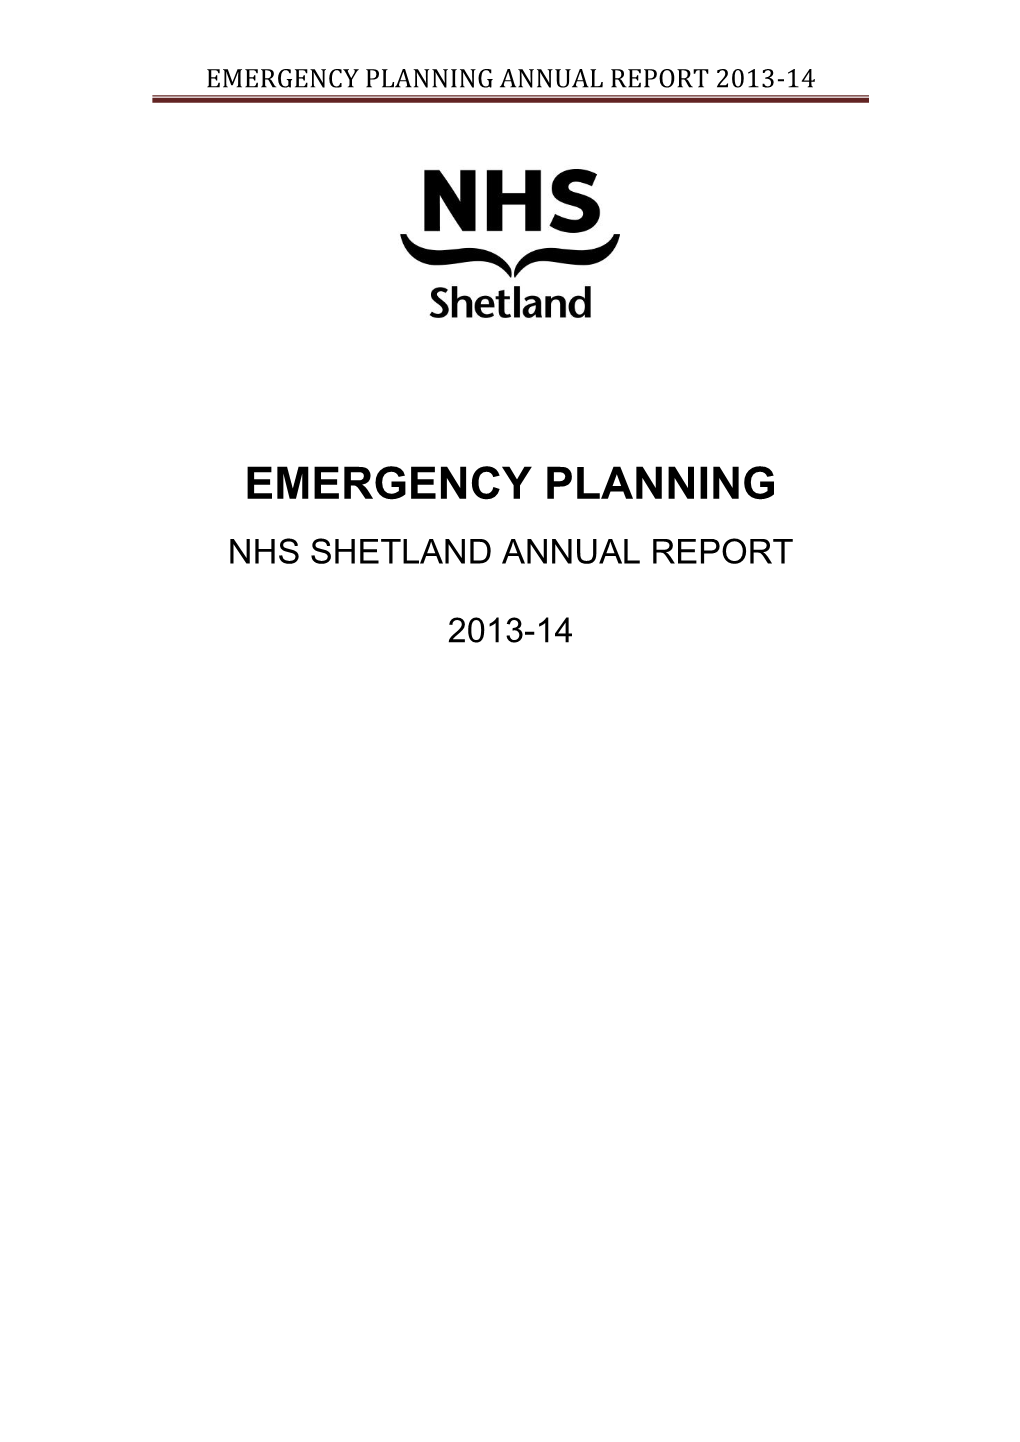 Emergency Planning Annual Report 2013-14